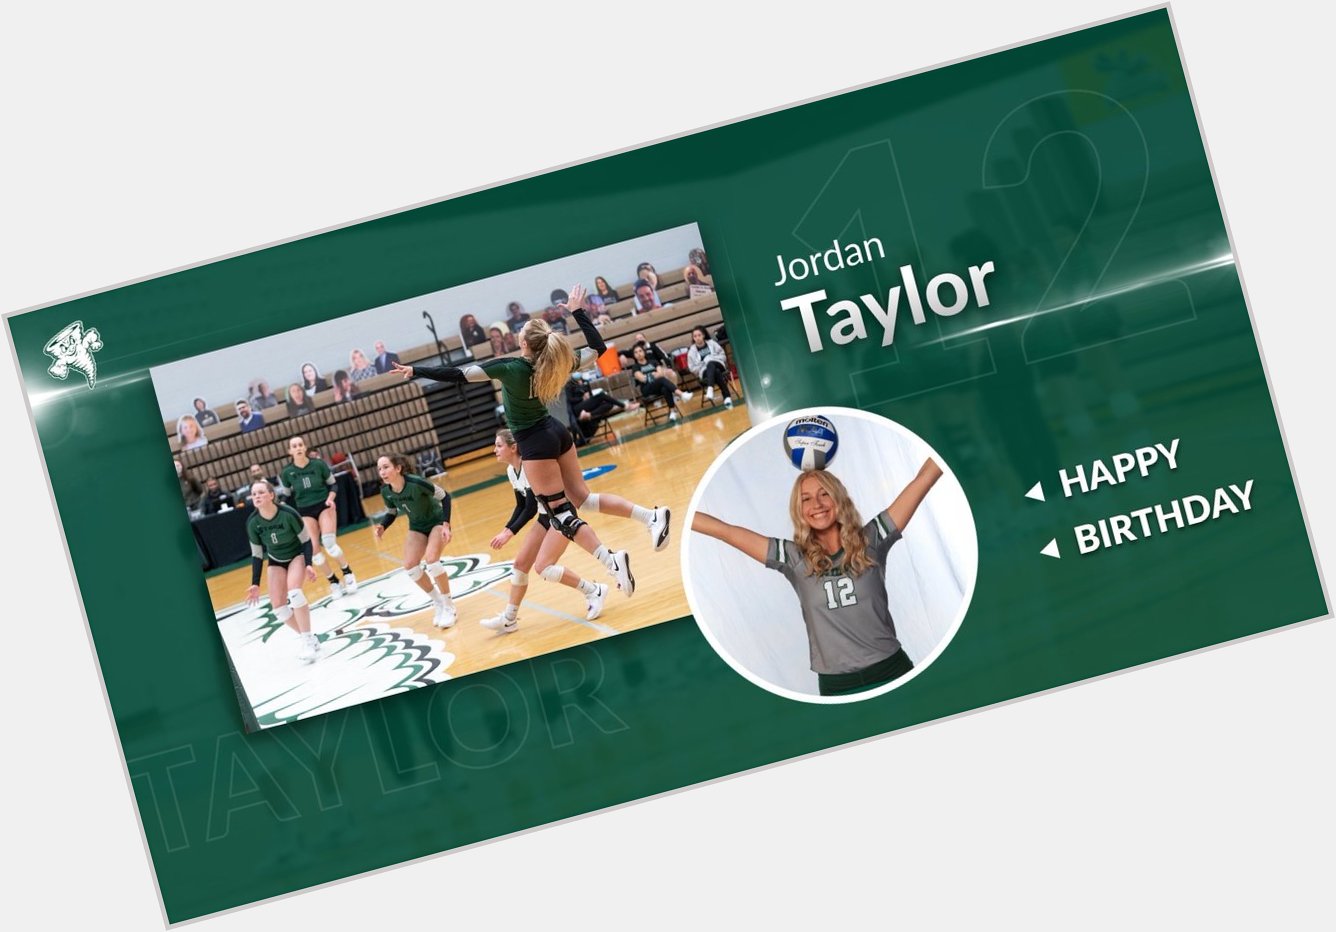 HAPPY BIRTHDAY to OH Jordan Taylor! Have a great day     